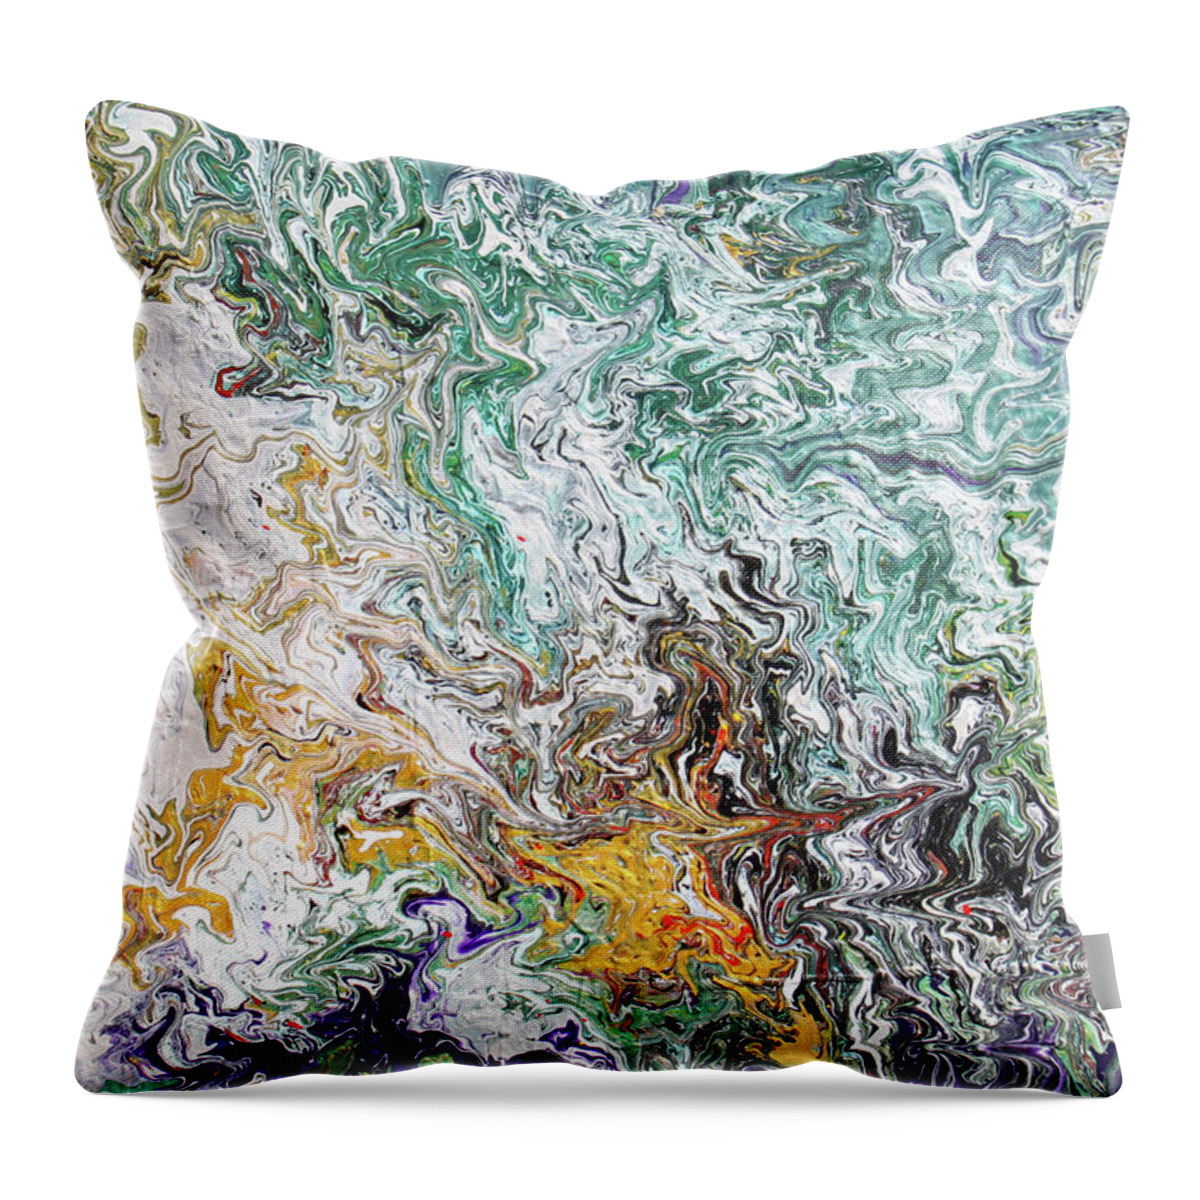 Fusionart Throw Pillow featuring the painting Crystallize by Ralph White